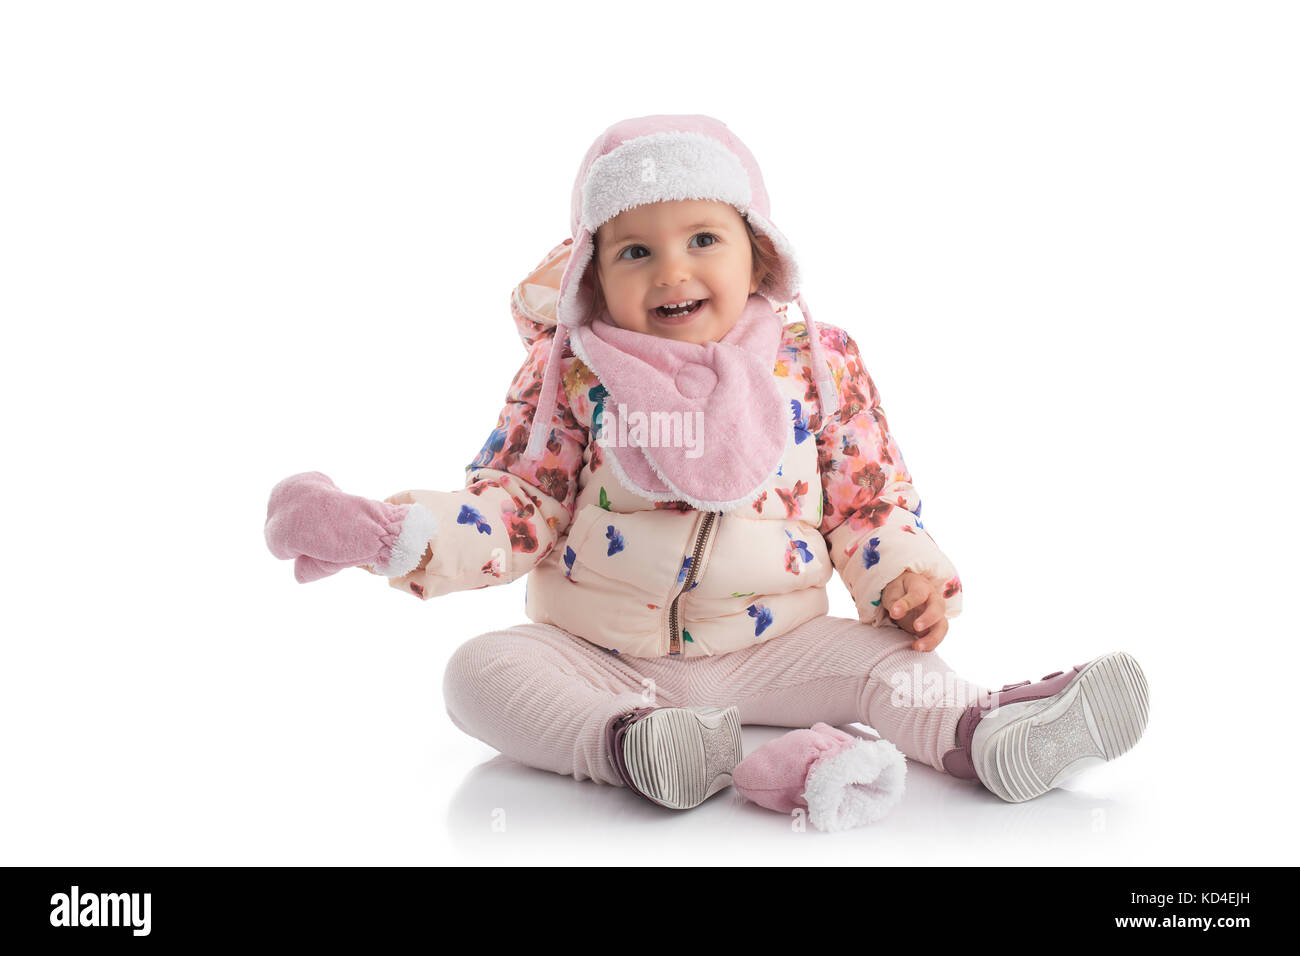 Portrait of a baby girl on a white background Stock Photo